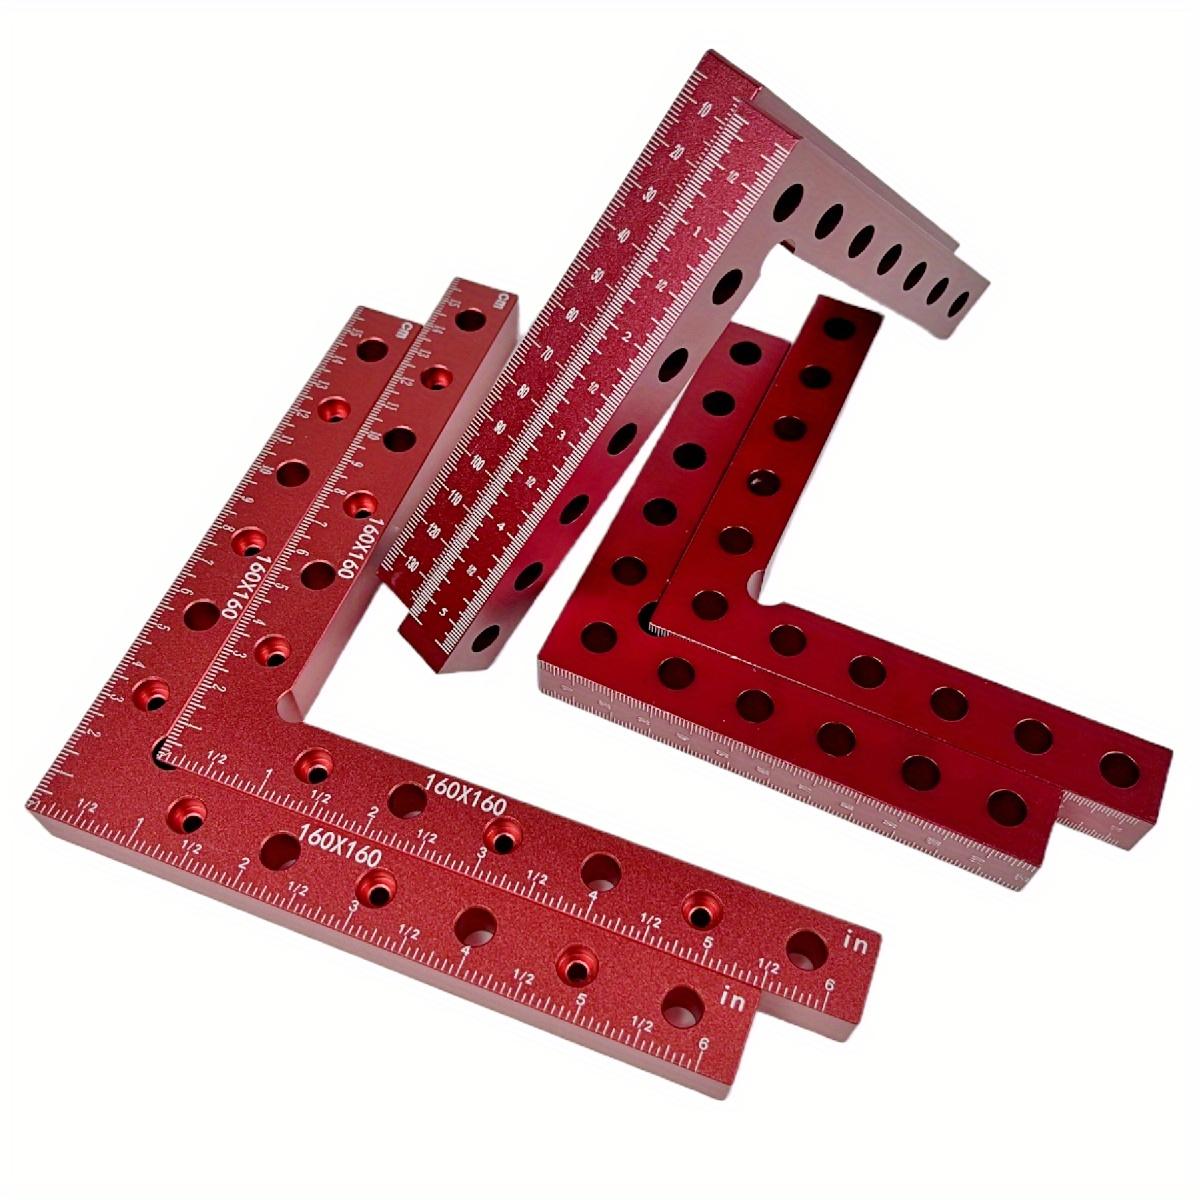 Wise Buys: Right-angle Assembly Squares